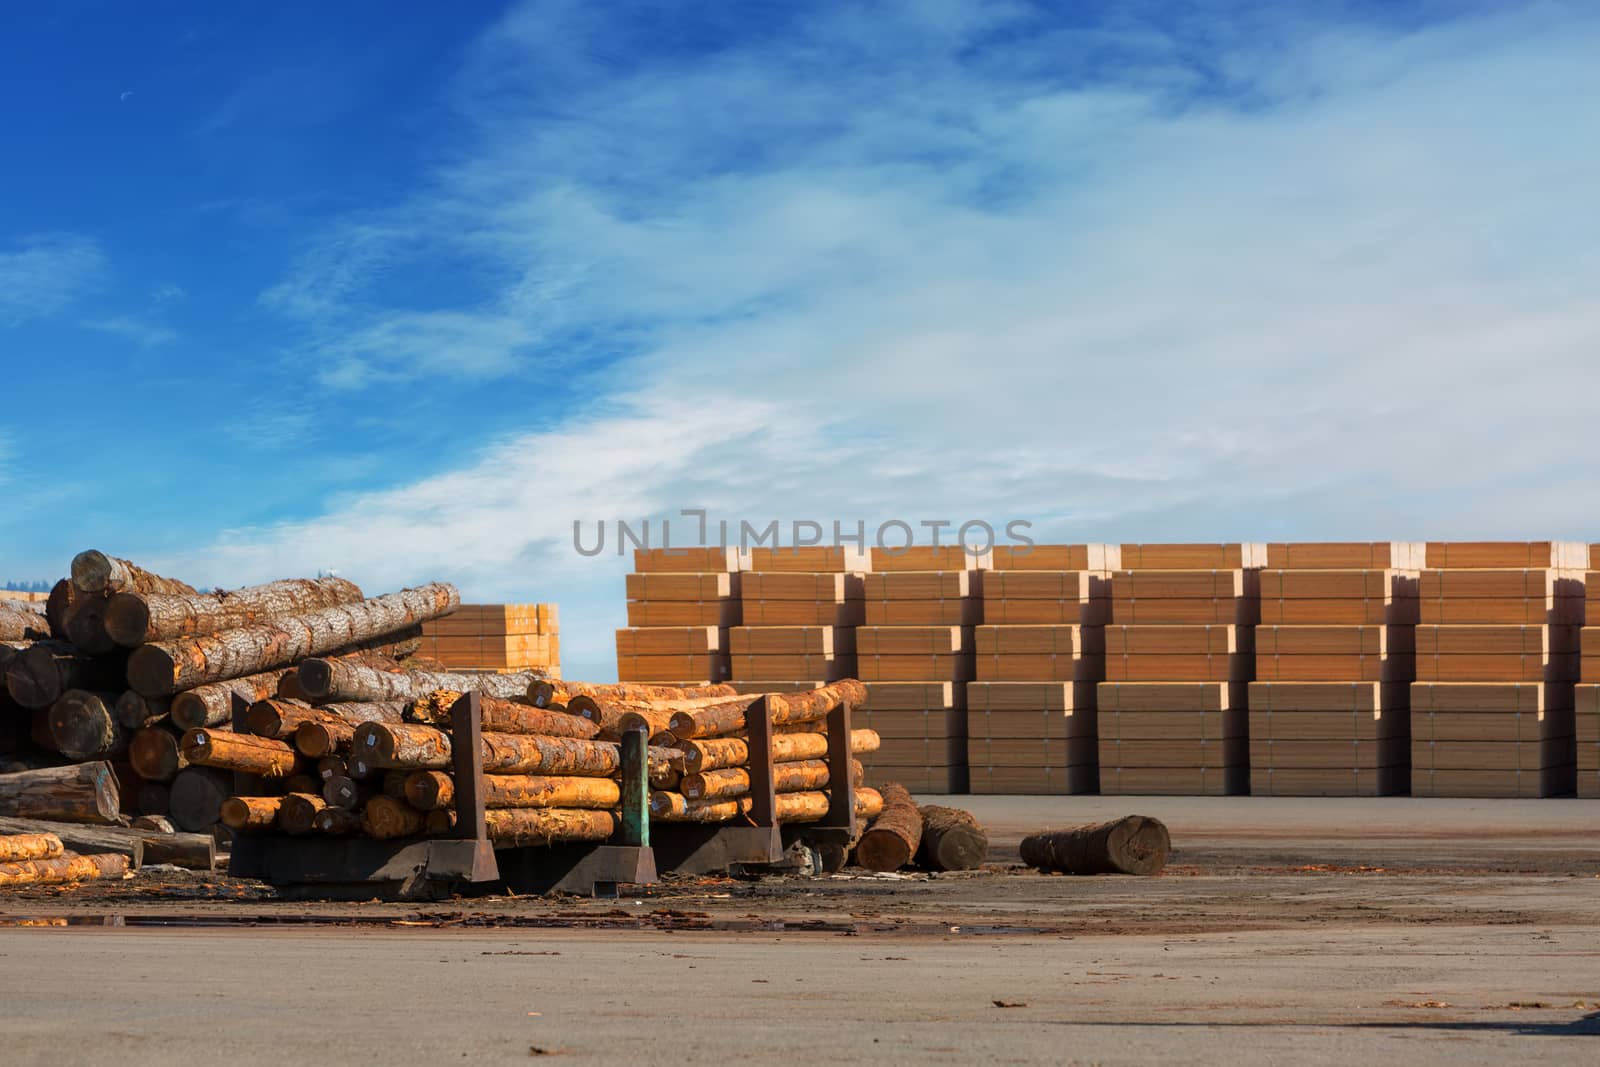 Tree logs and plywood products at Lumber Mill in Rainier Oregon